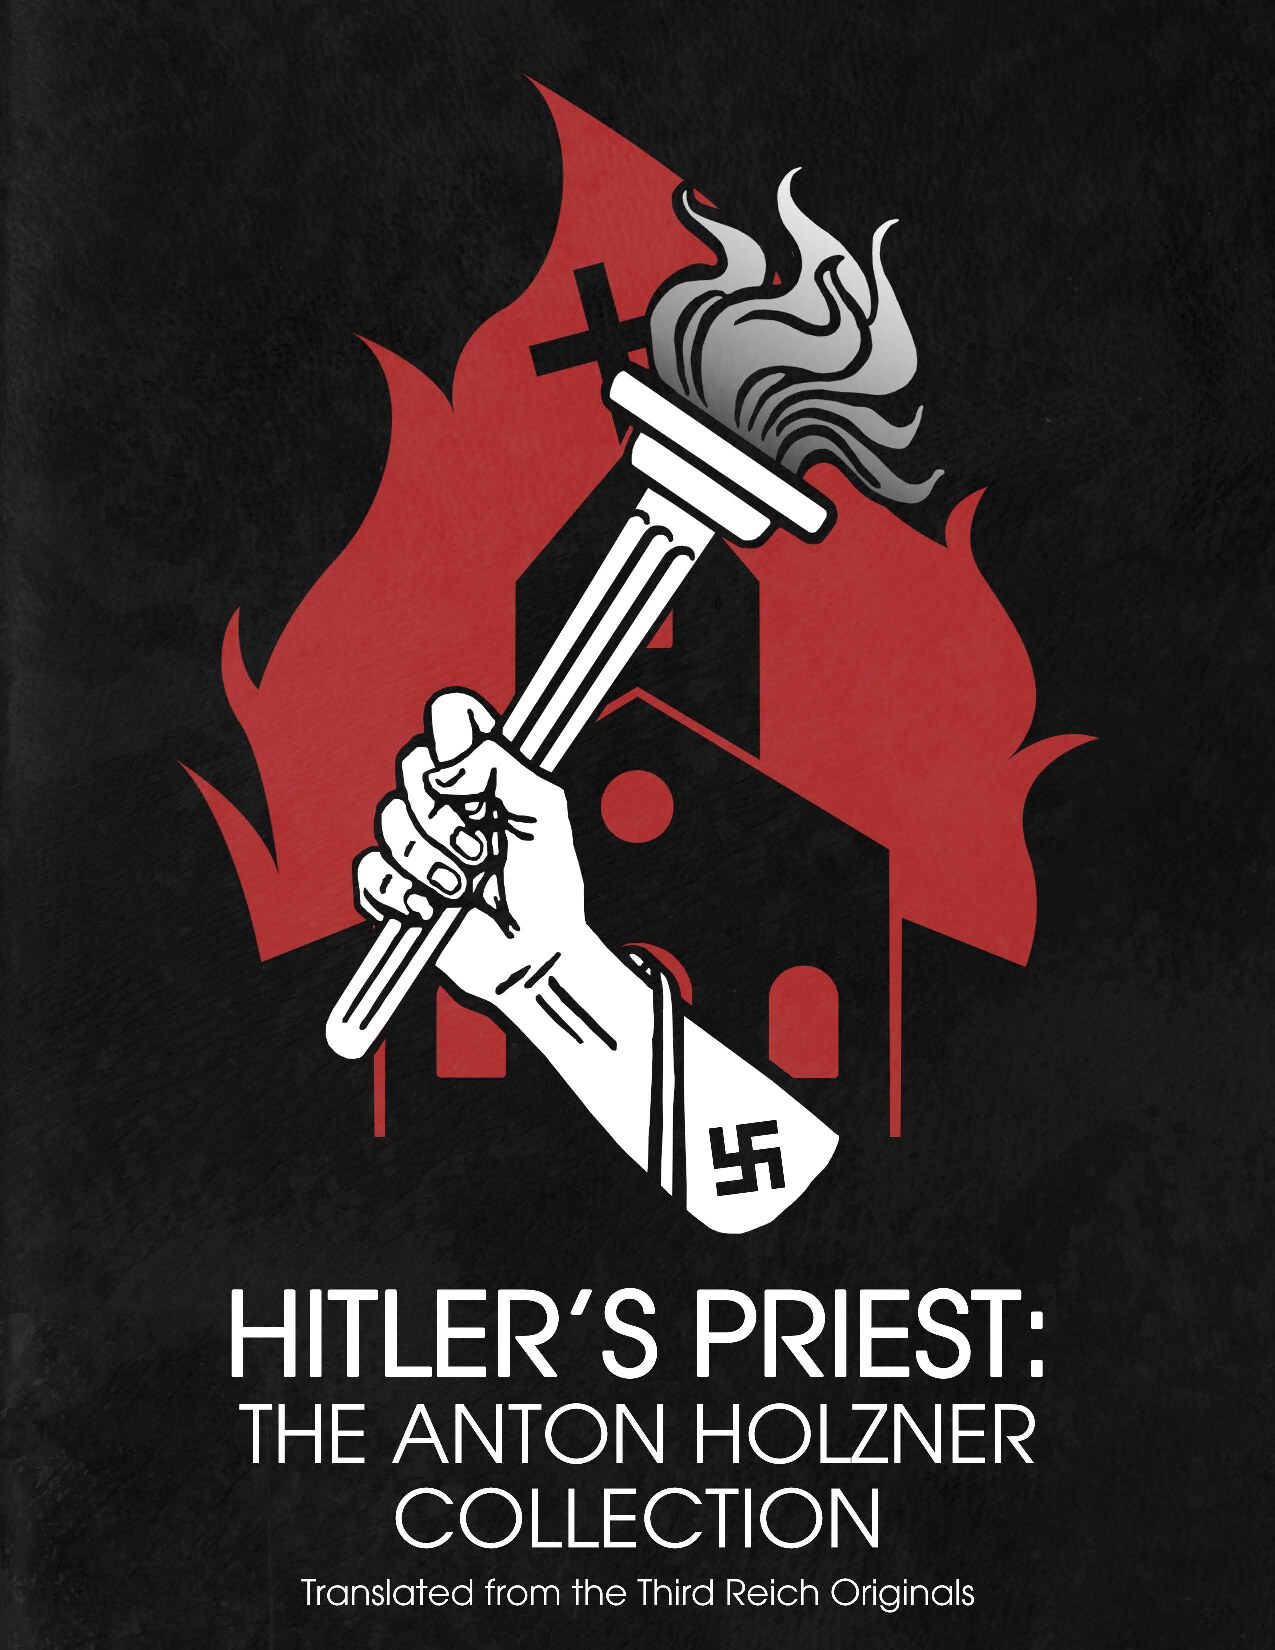 Hitler's Priest: The Anton Holzner Collection